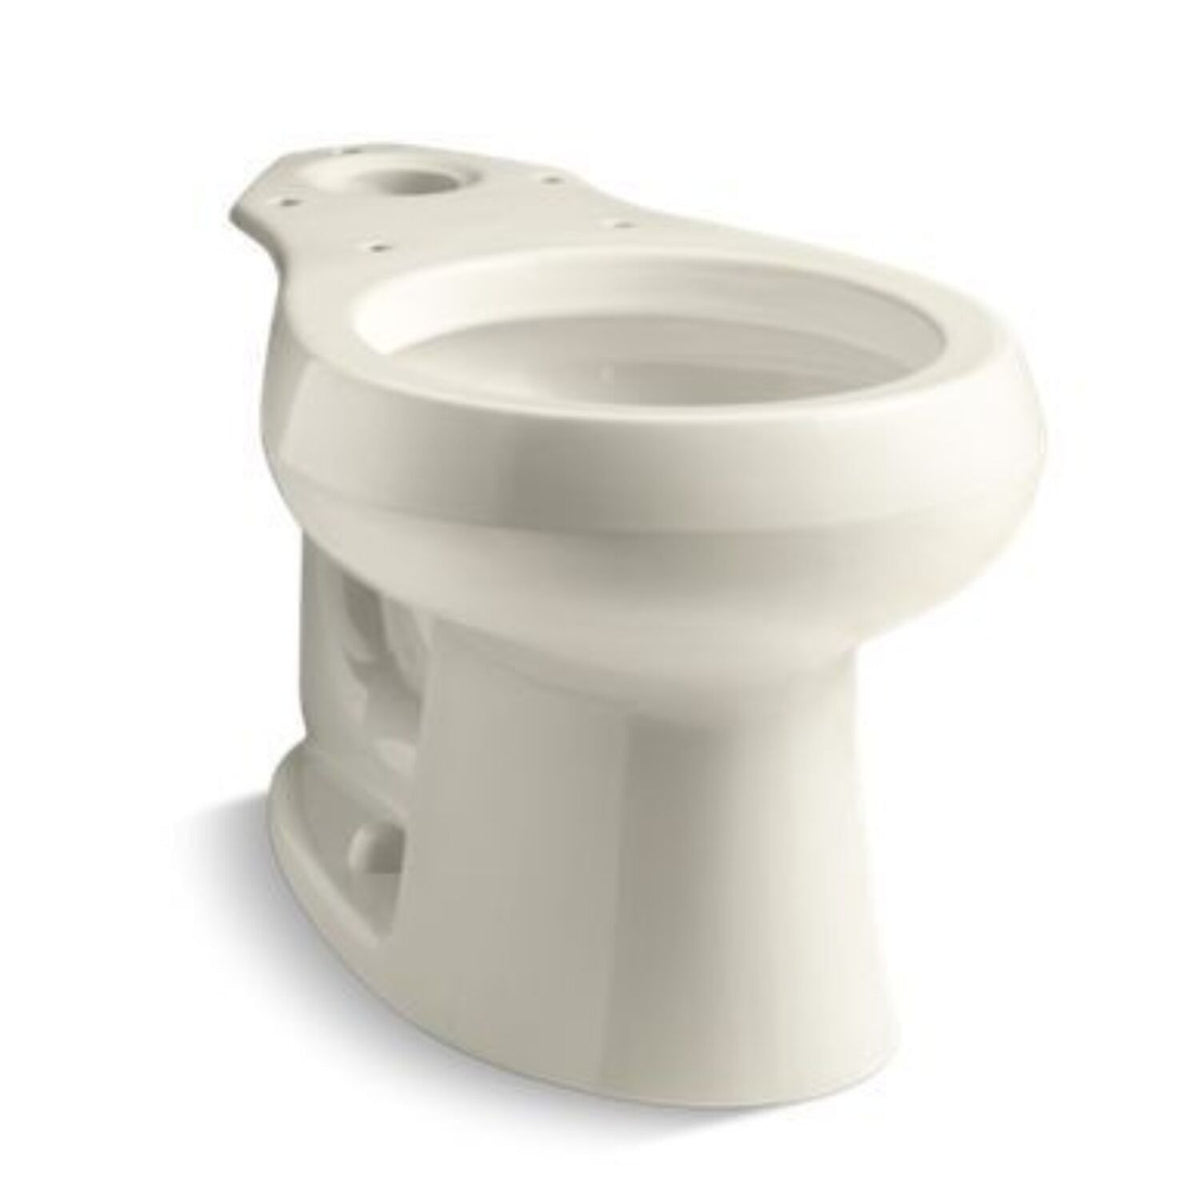 WELLWORTH ROUND-FRONT TOILET BOWL ONLY